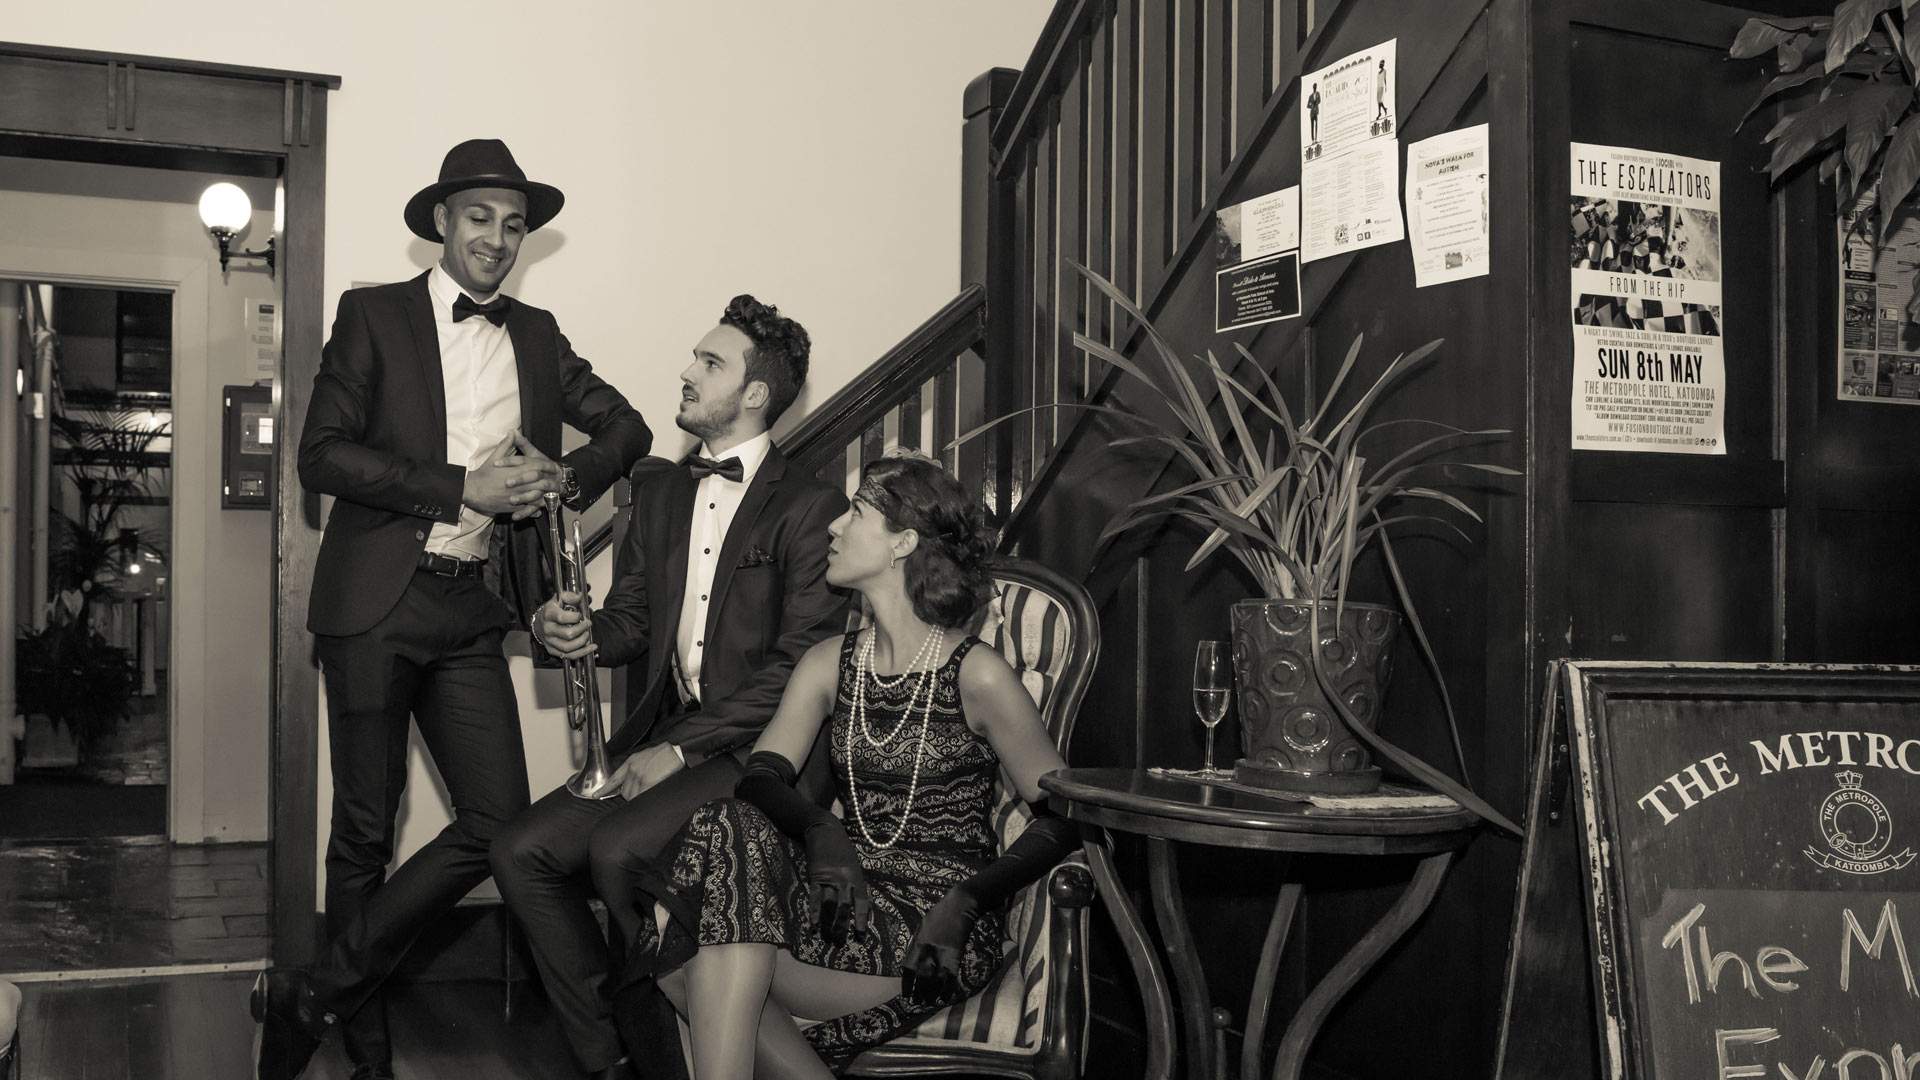 The Roaring 20s and All That Jazz Festival